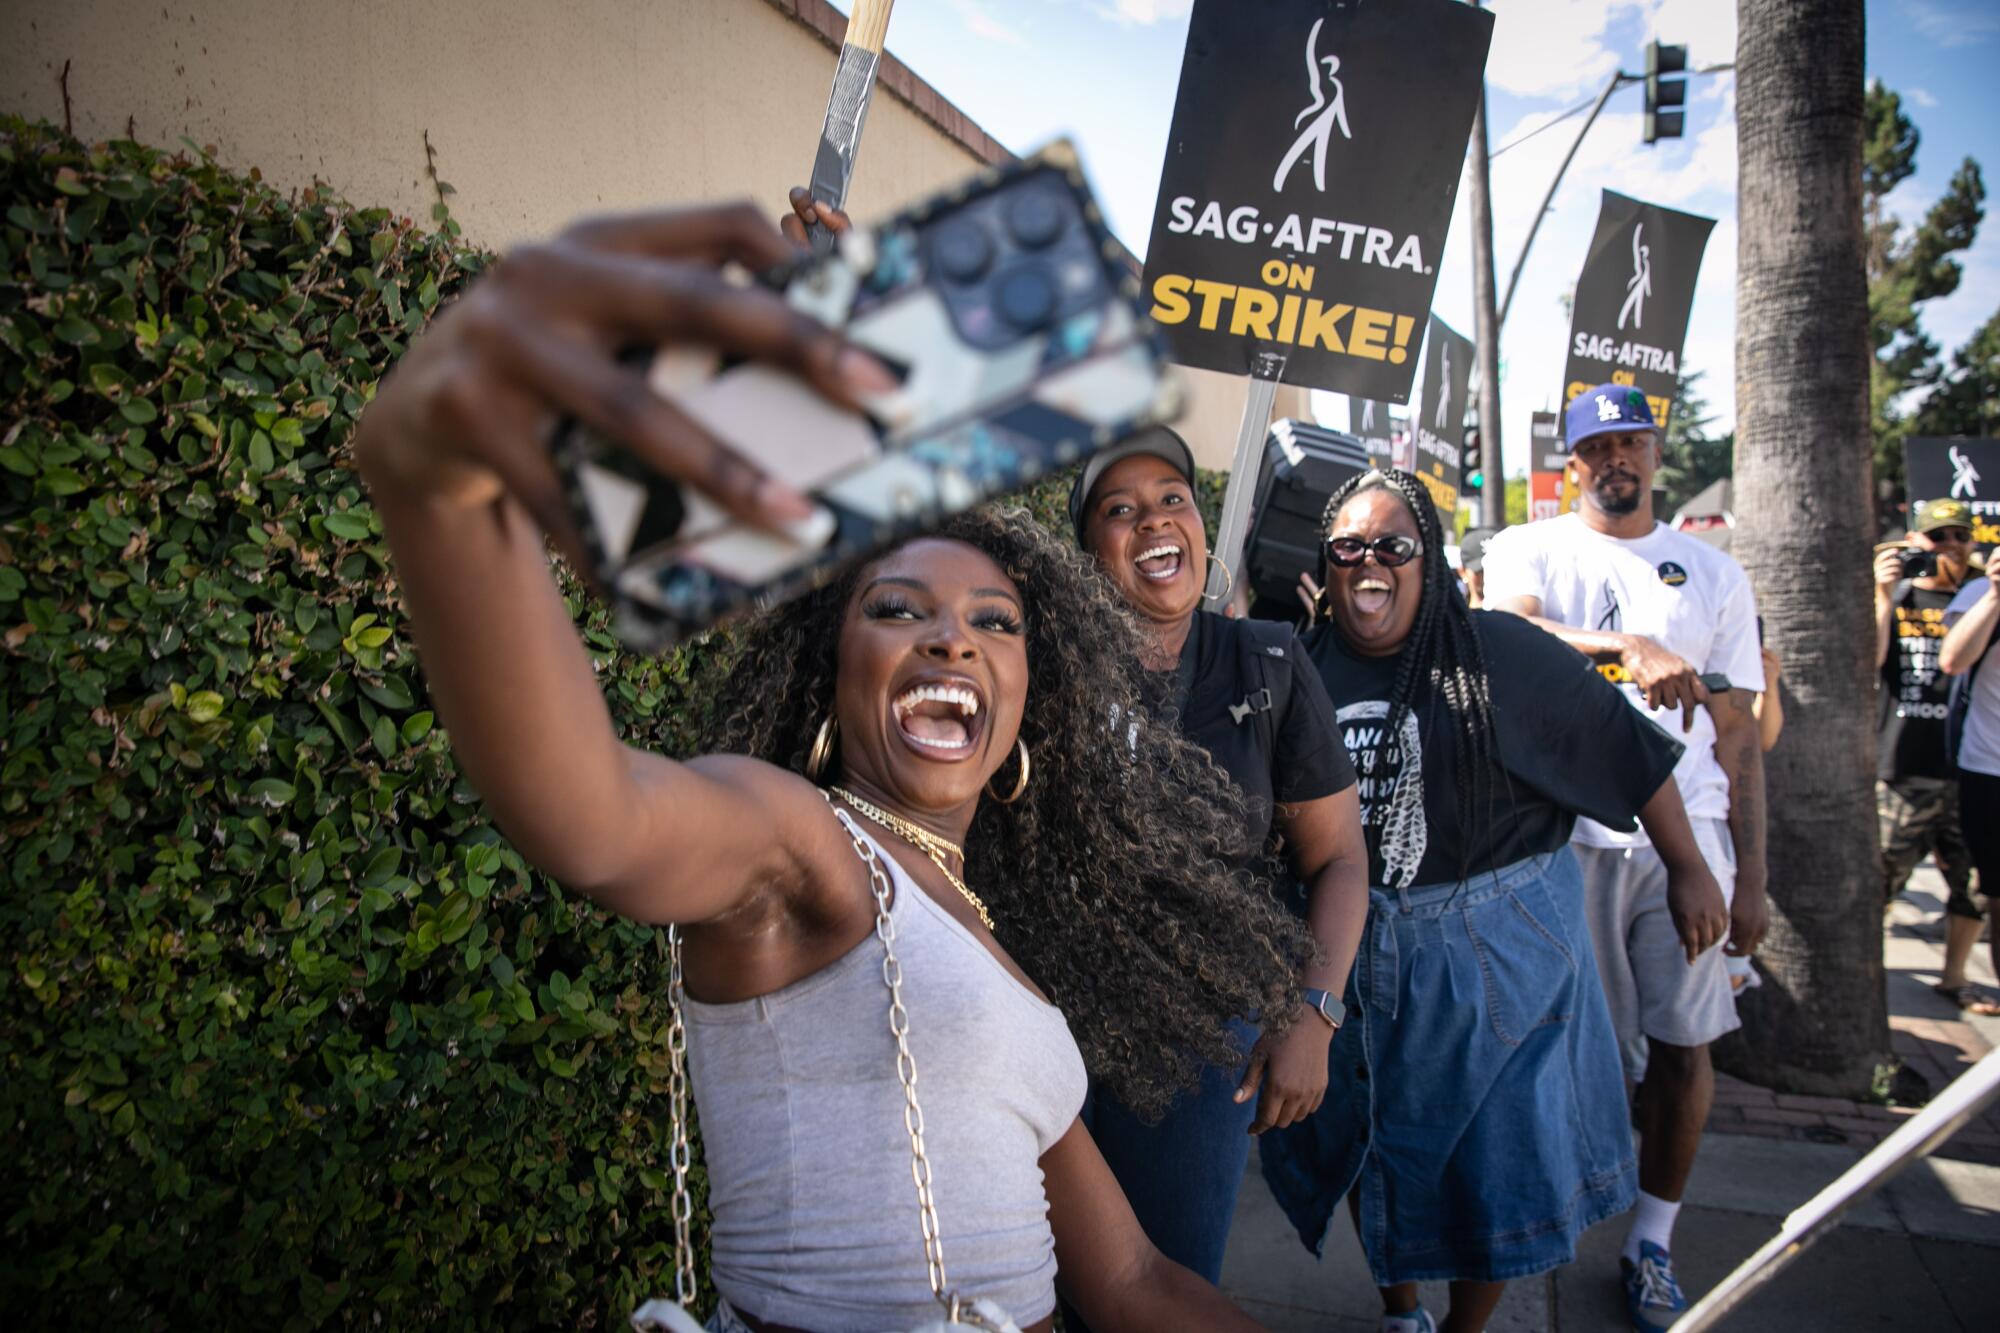 Three Black women take a selfie together on a picket line